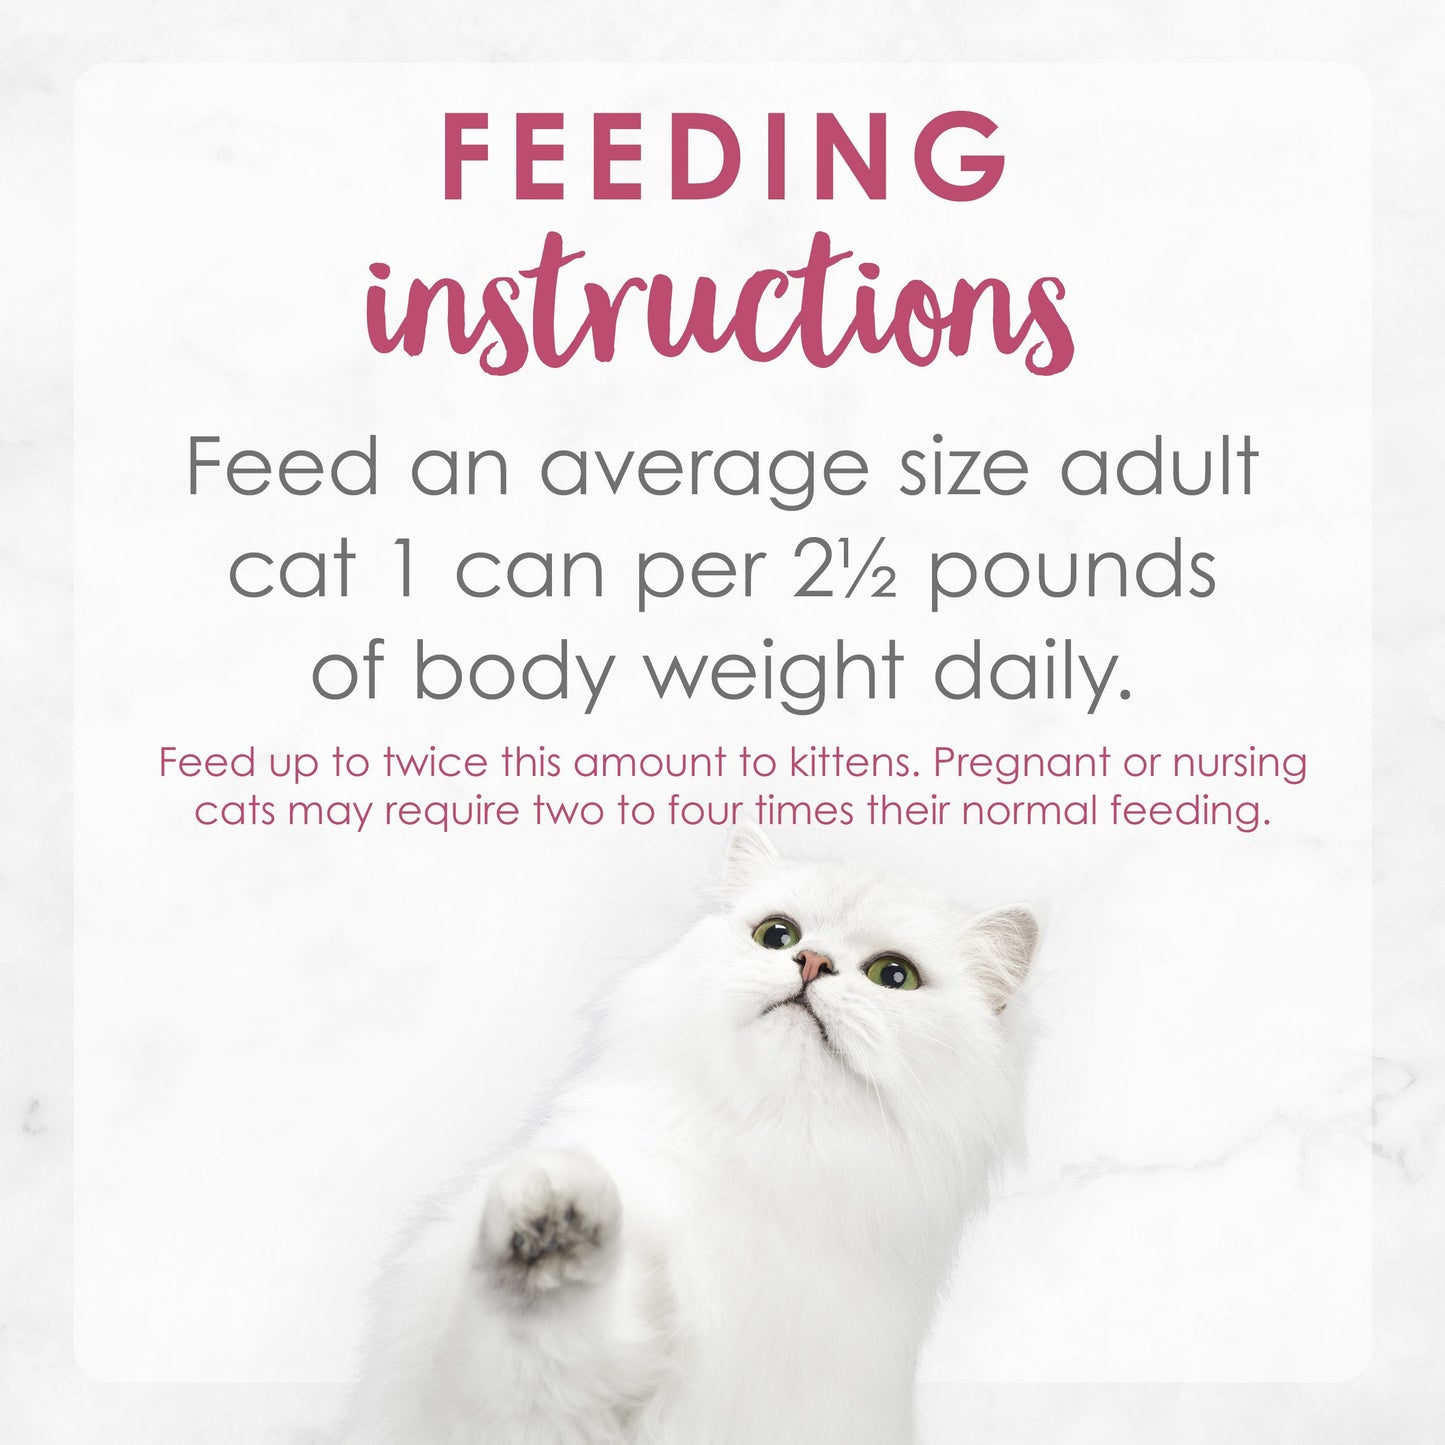 Feeding Instructions. Feed an average size adult cat 1 can per 2.5 pounds of body weight daily. Feed twice this amount to kittens. Pregnant or nursing cats may require two to four times their normal feeding.